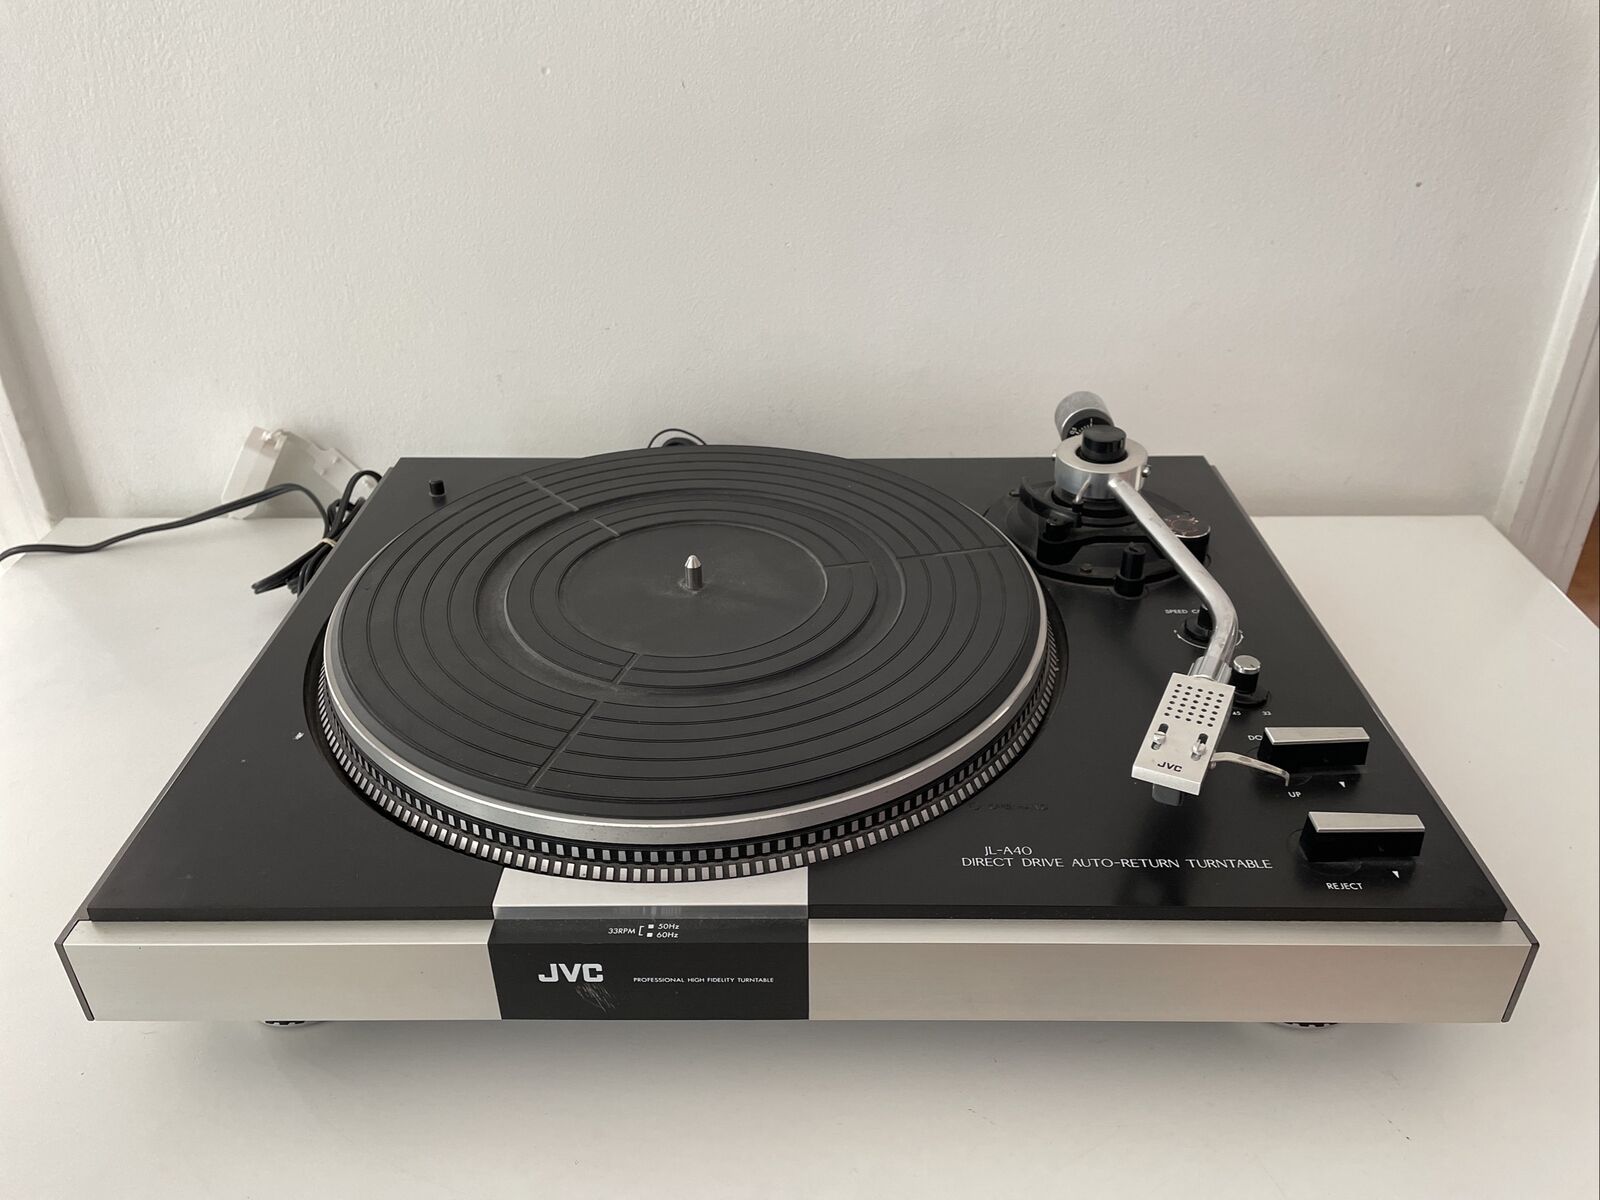 How To Replace The Belt On My JVC Turntable